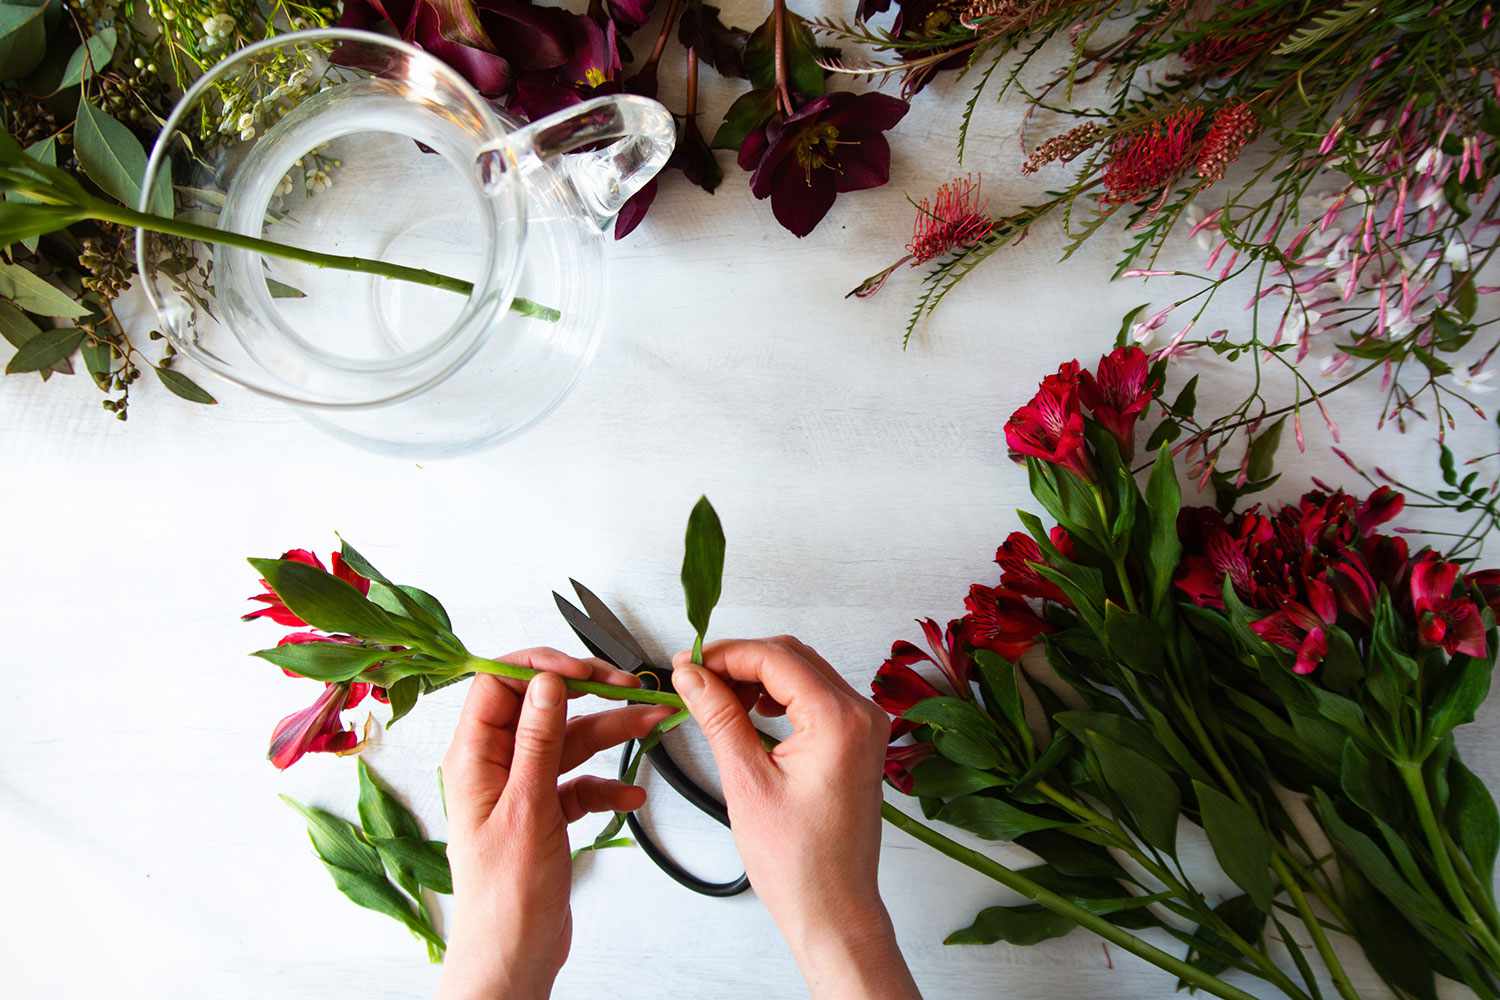 How To Prepare Flowers For A Vase